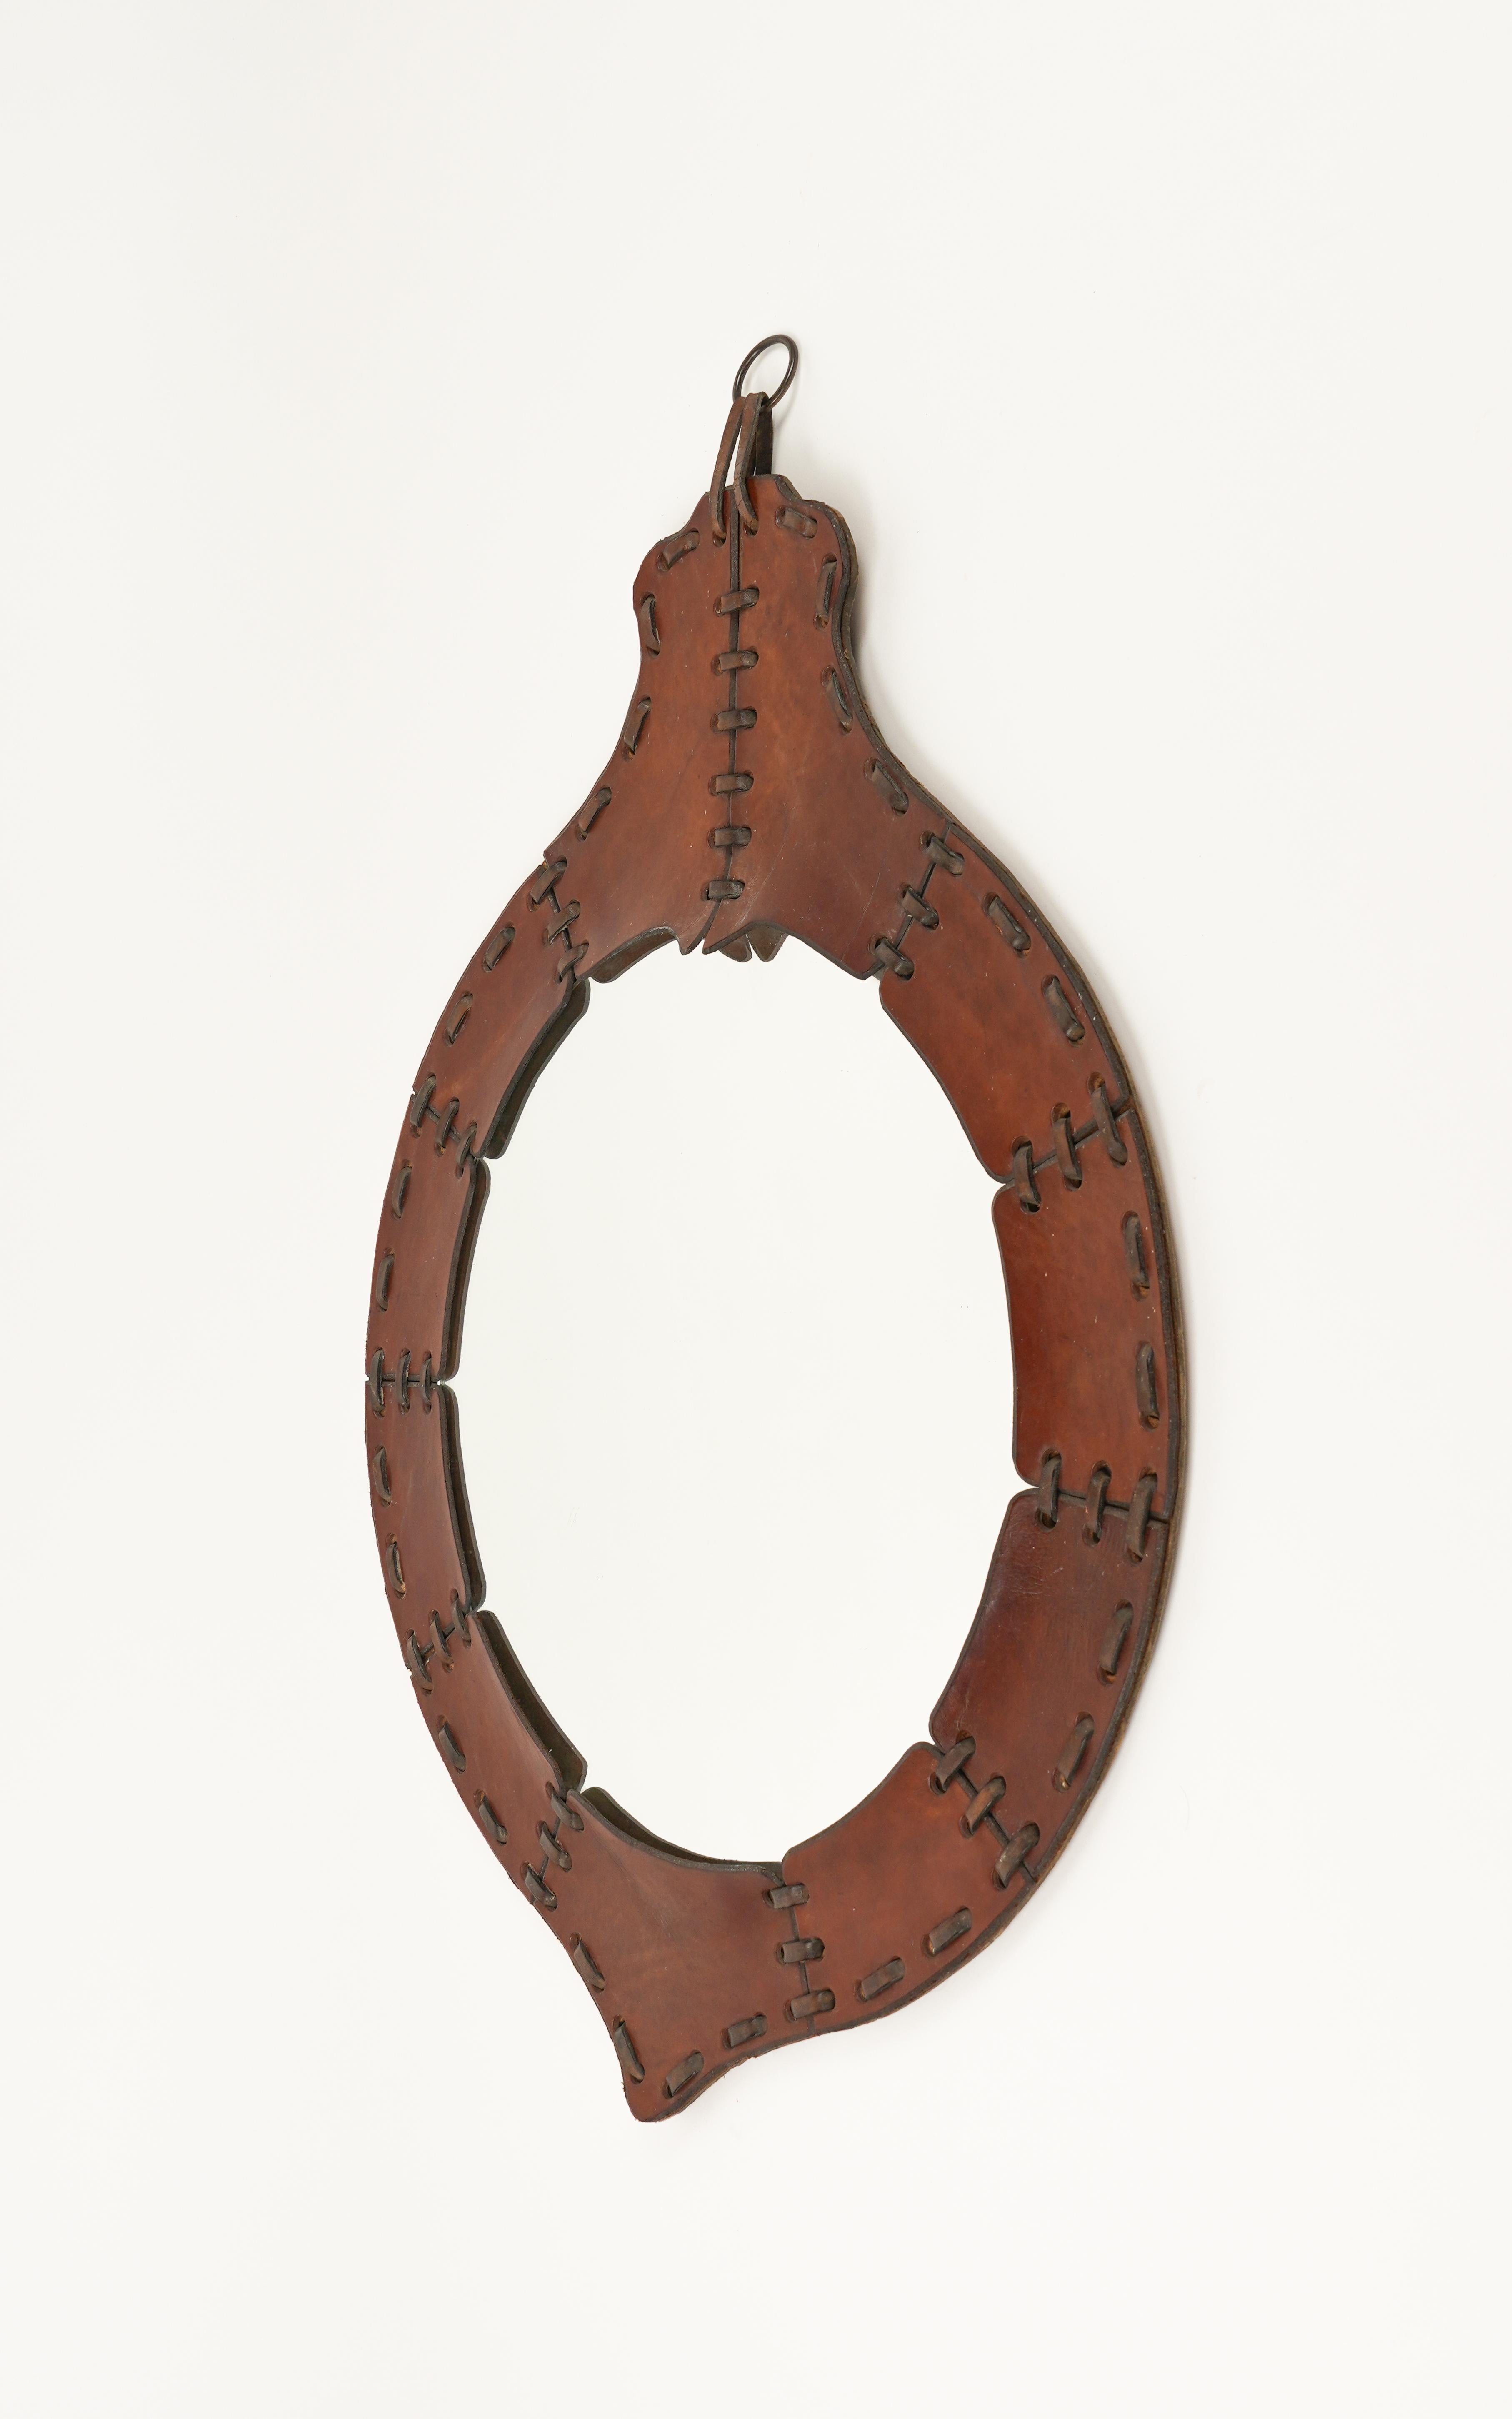 Midcentury Teardrop Wall Mirror in Leather, Italy 1960s For Sale 2